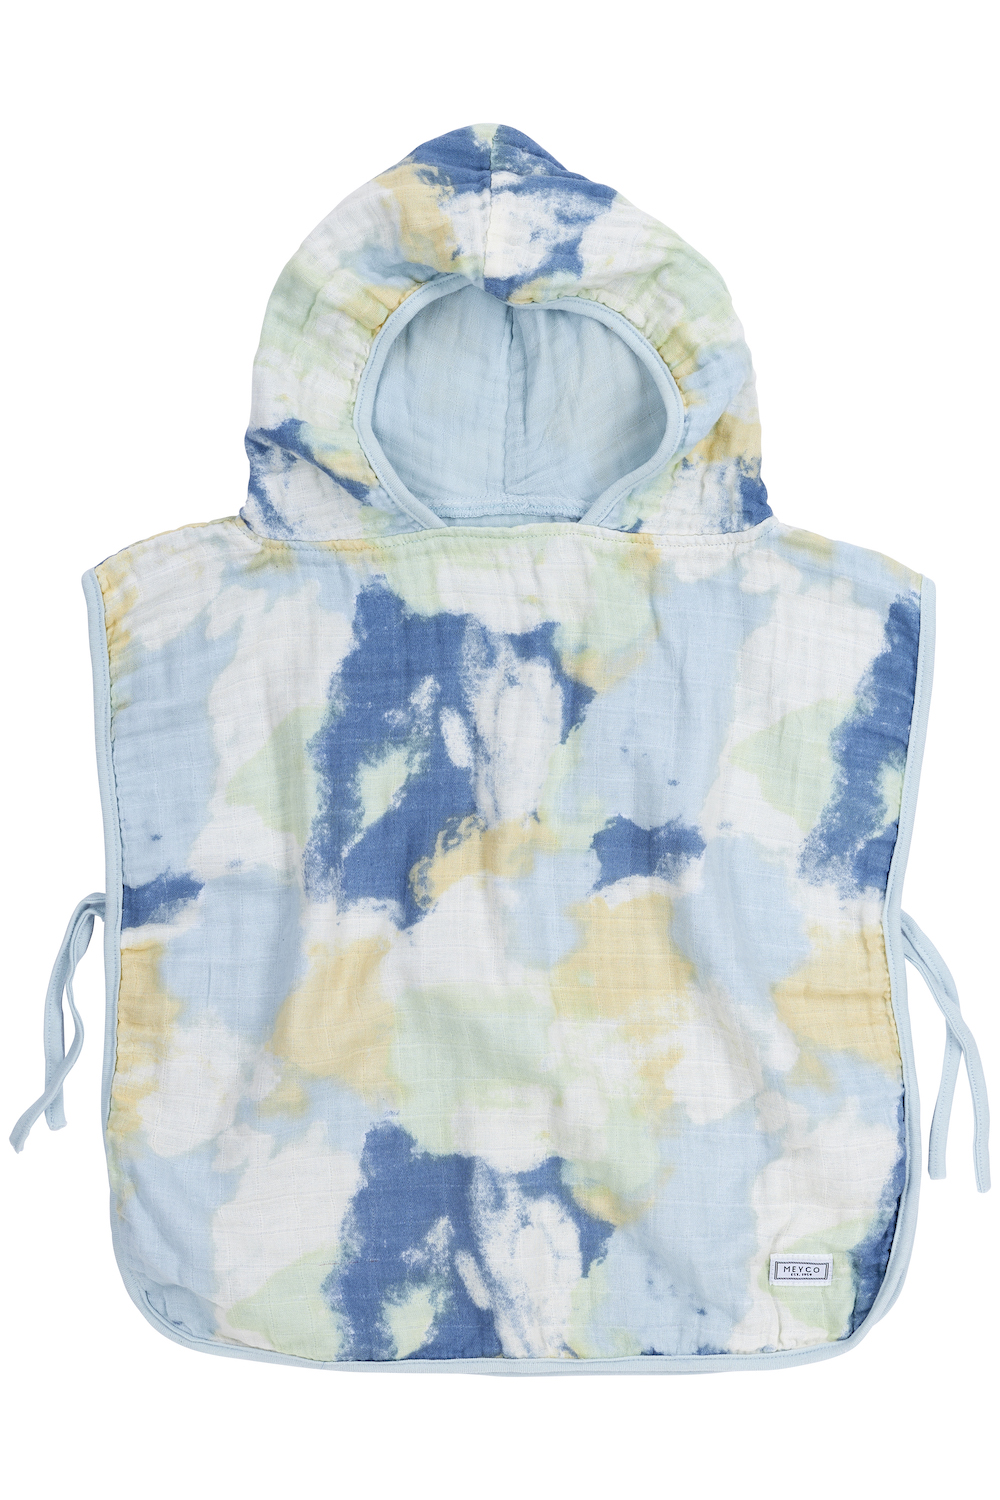 Badeponcho pre-washed musselin Tie-Dye - light blue - 1-3 Jahre